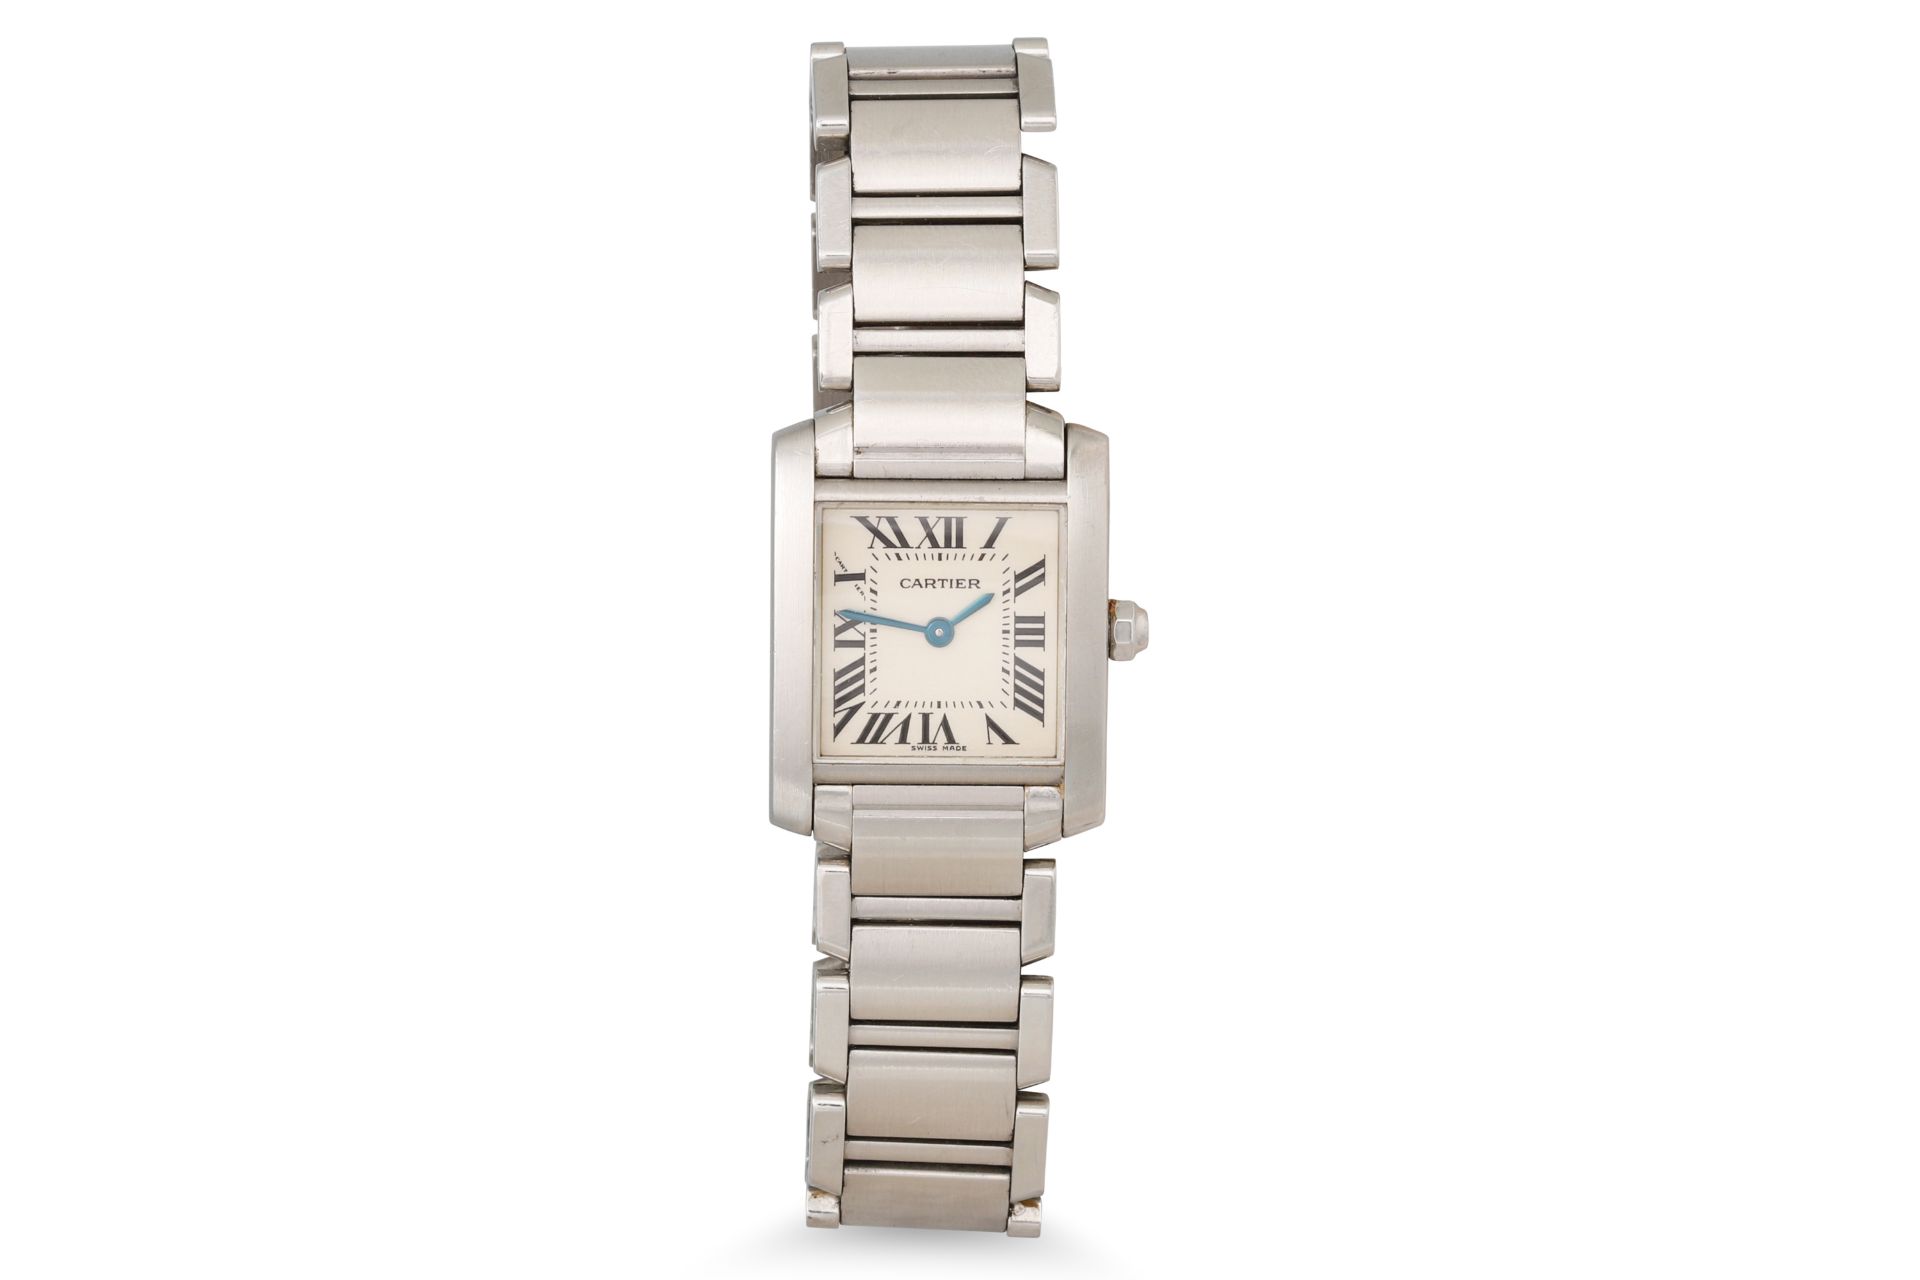 A LADY'S STAINLESS STEEL CARTIER WRISTWATCH, tank, white face with Roman numerals, three spare